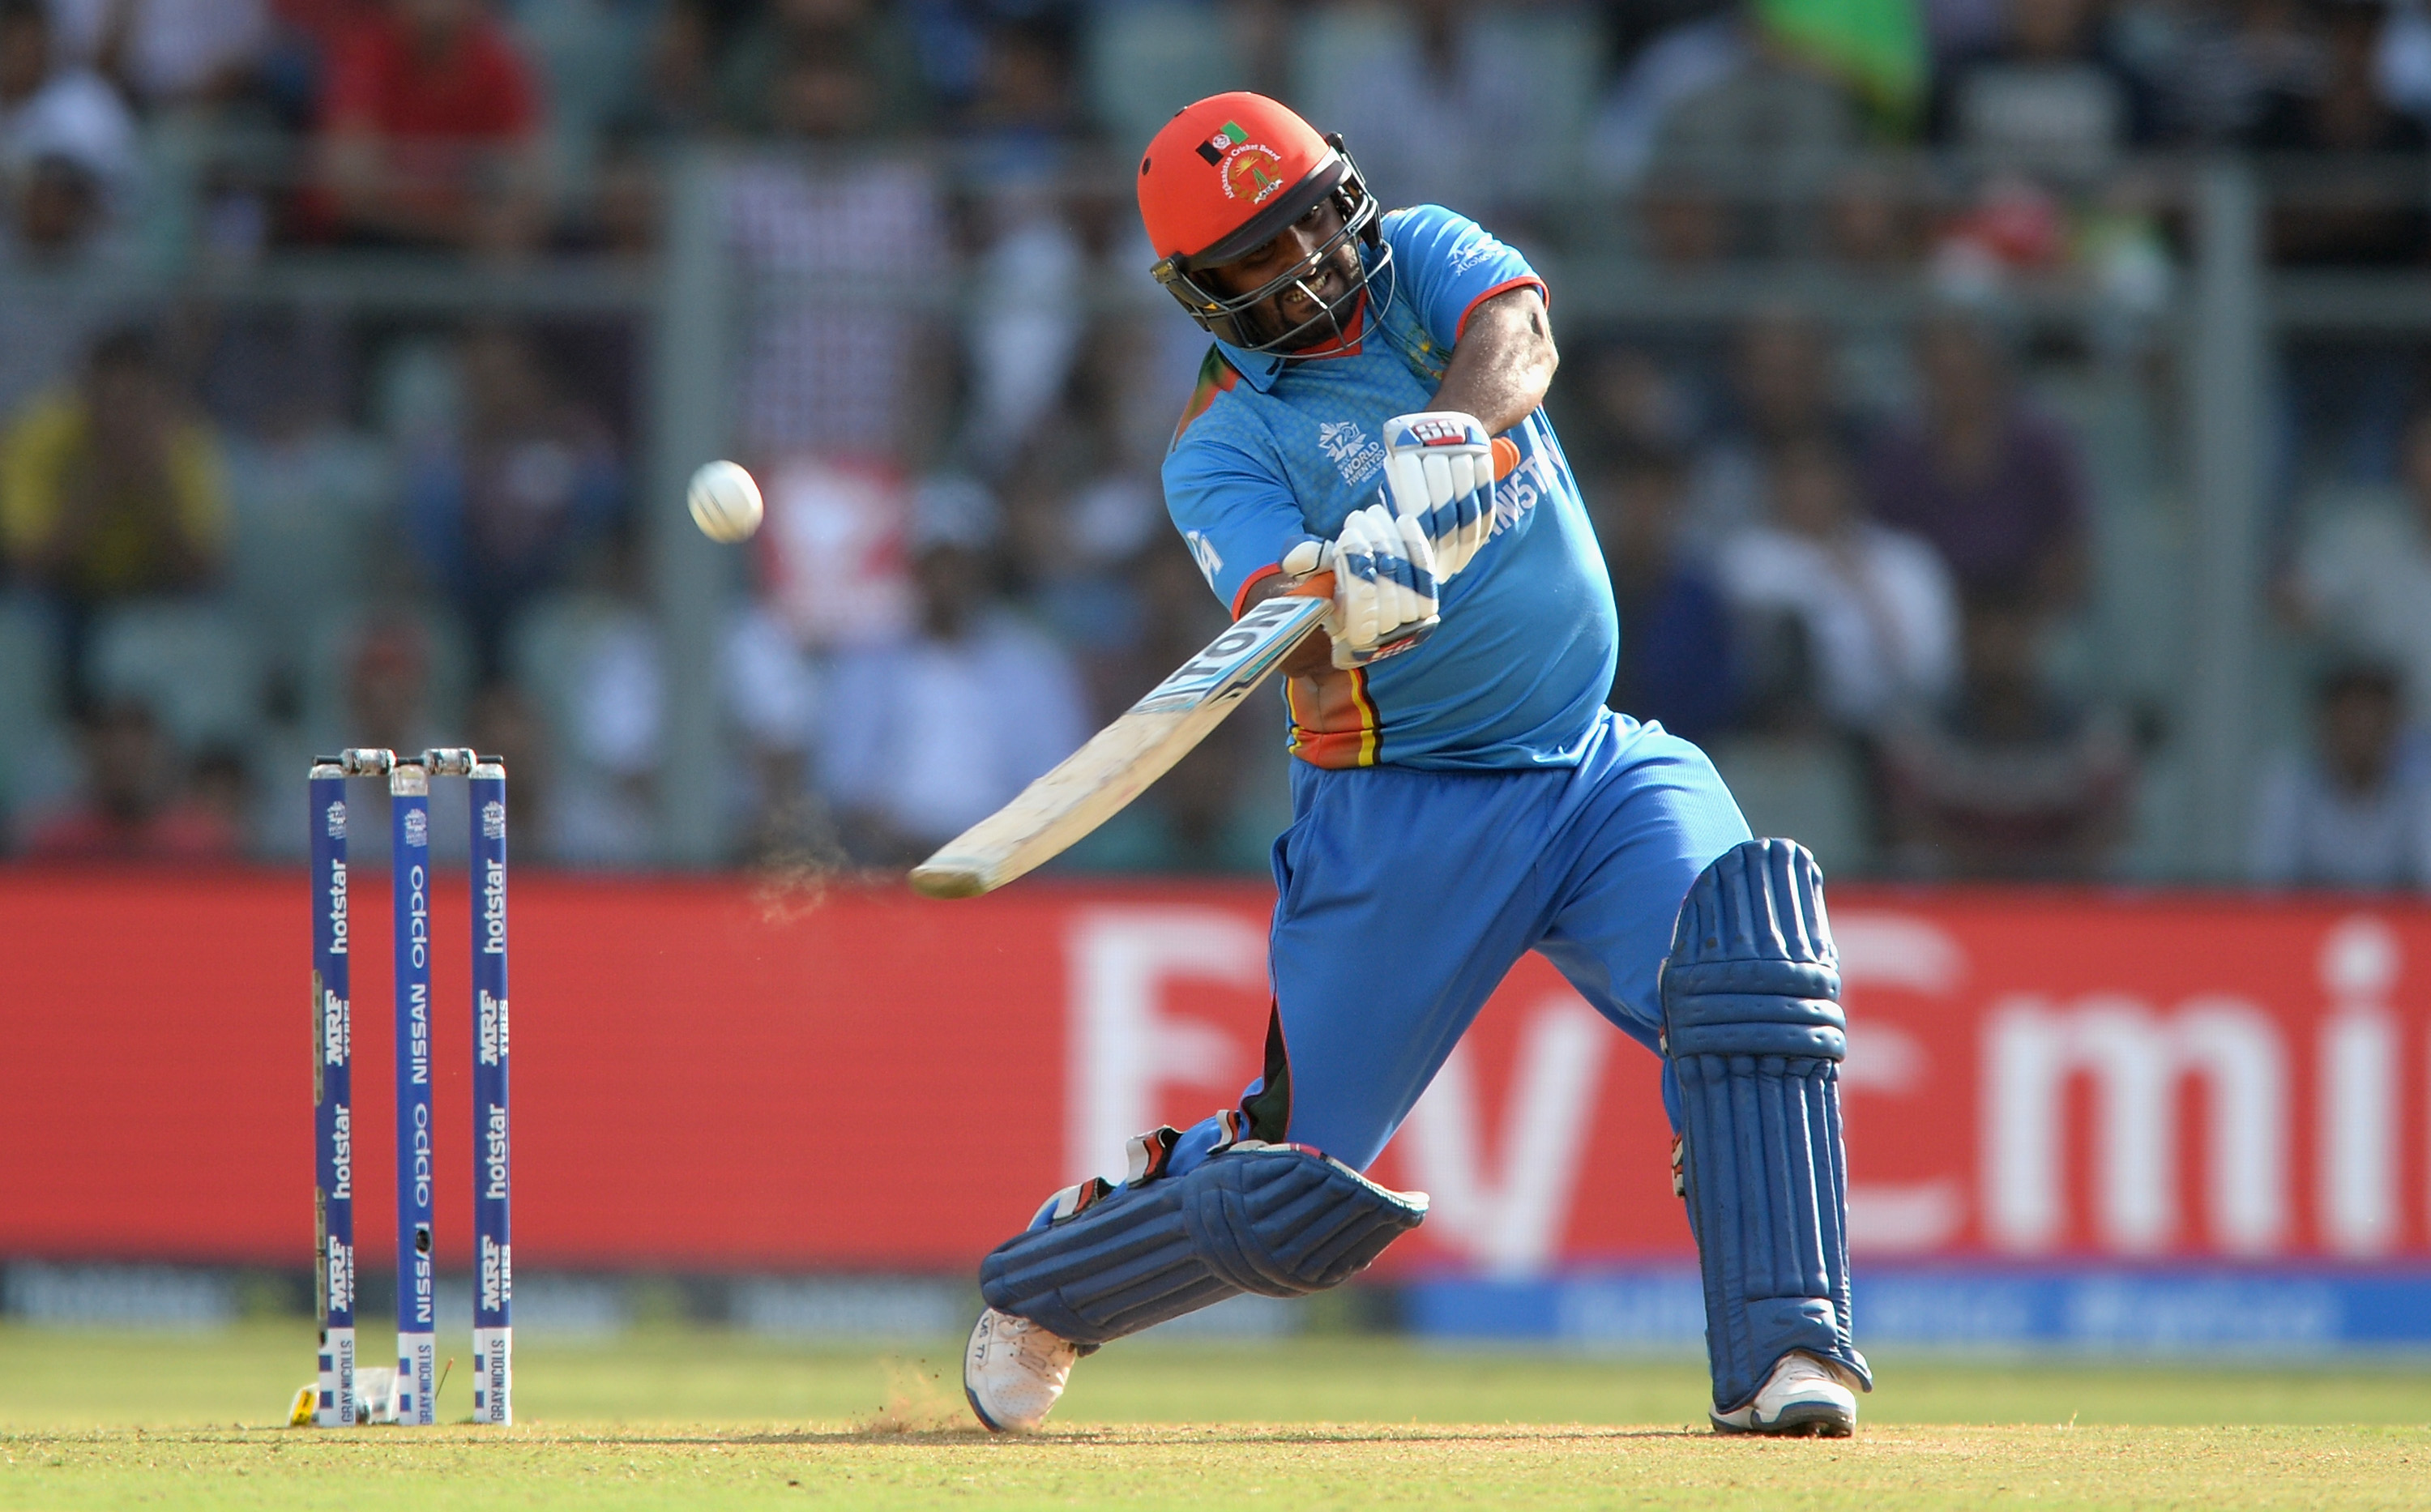 Video Mohammad Shahzad hits a blistering 74 off 16 deliveries to set a new T10 record